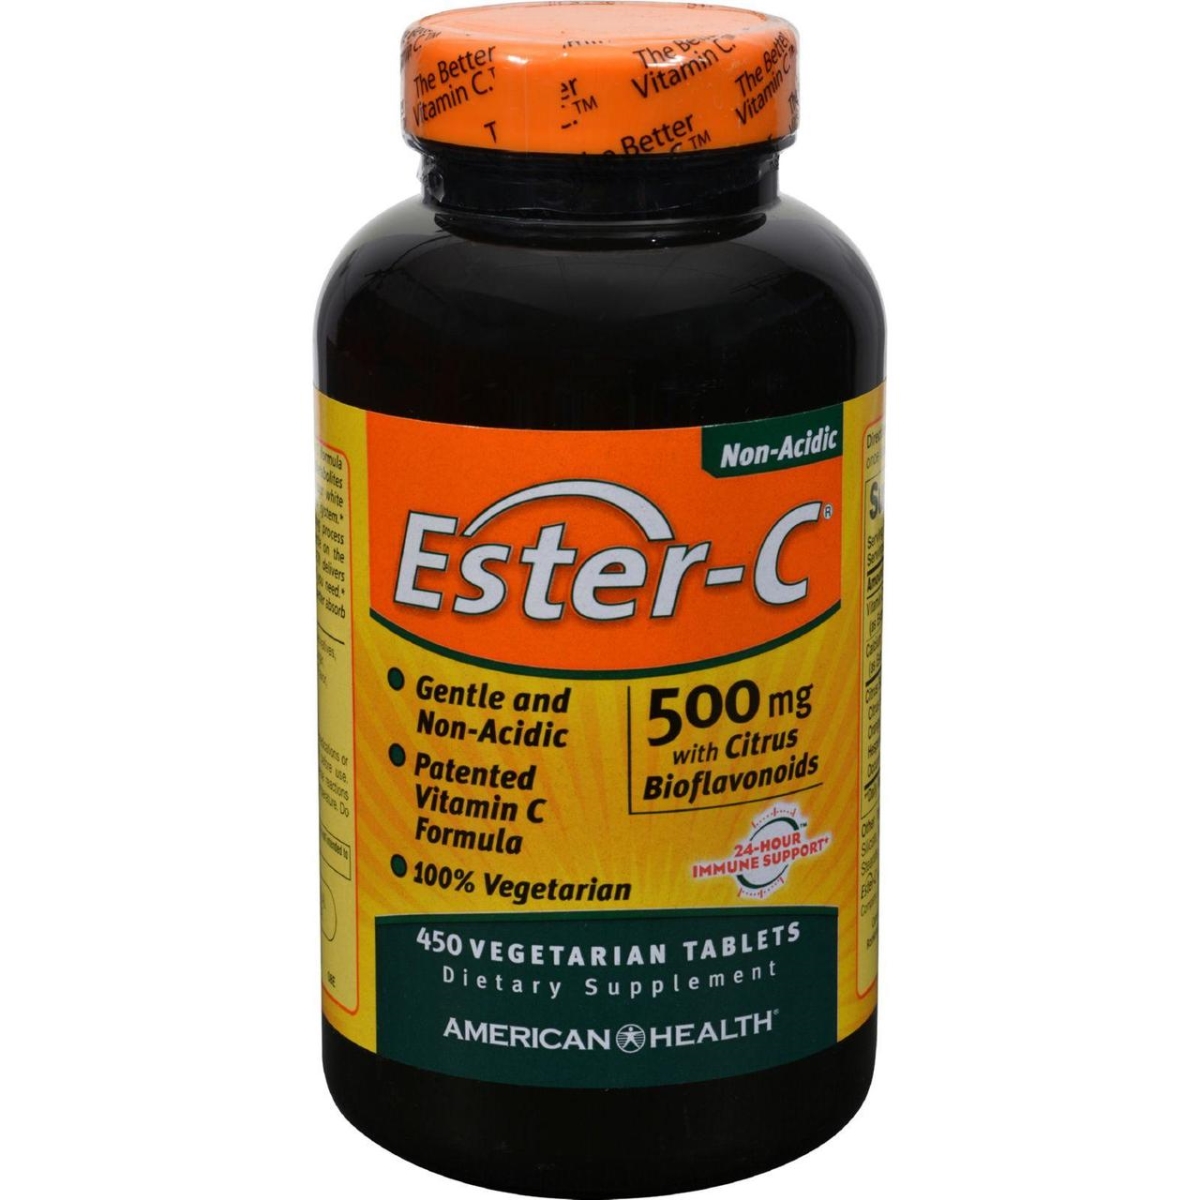 American Health Hg0888313 500 Mg Ester-c With Citrus Bioflavonoids, 450 Vegetarian Tablets